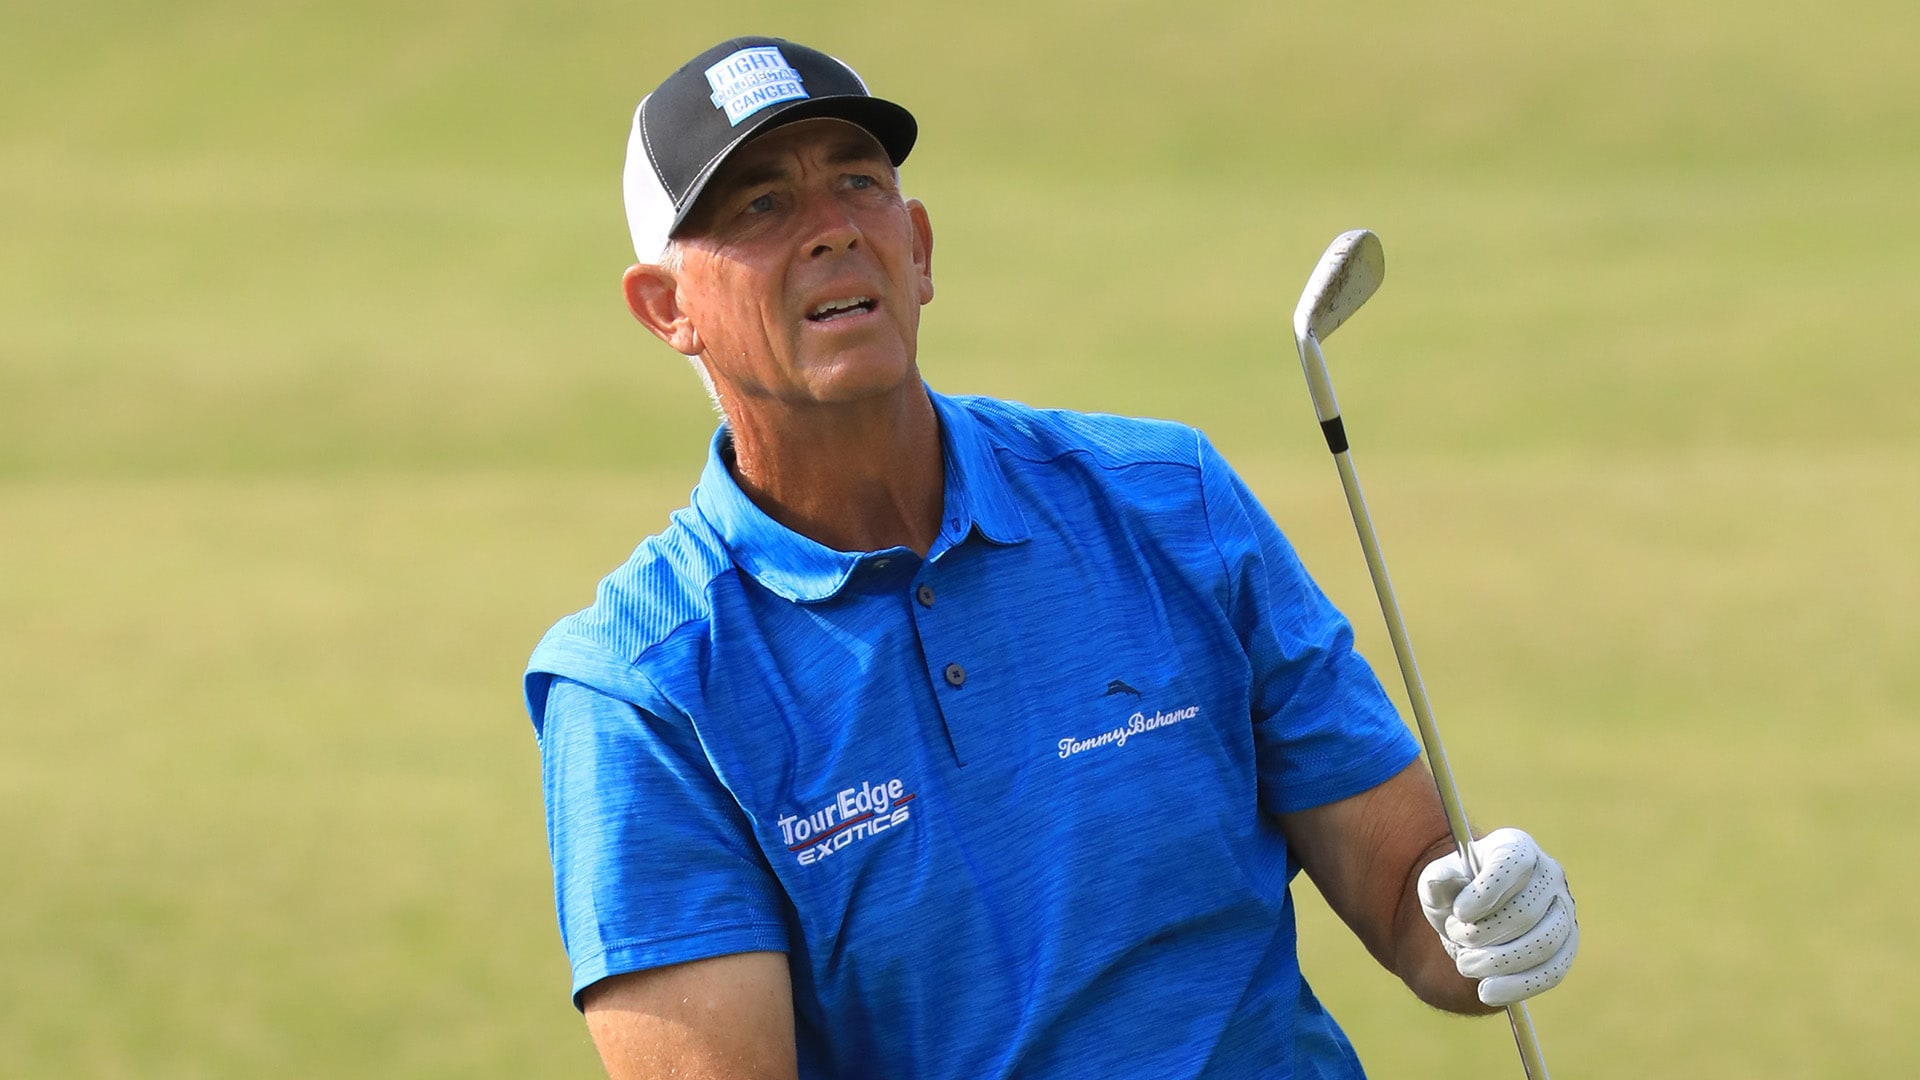 After moment of silence, Tom Lehman condemns injustice in no uncertain terms